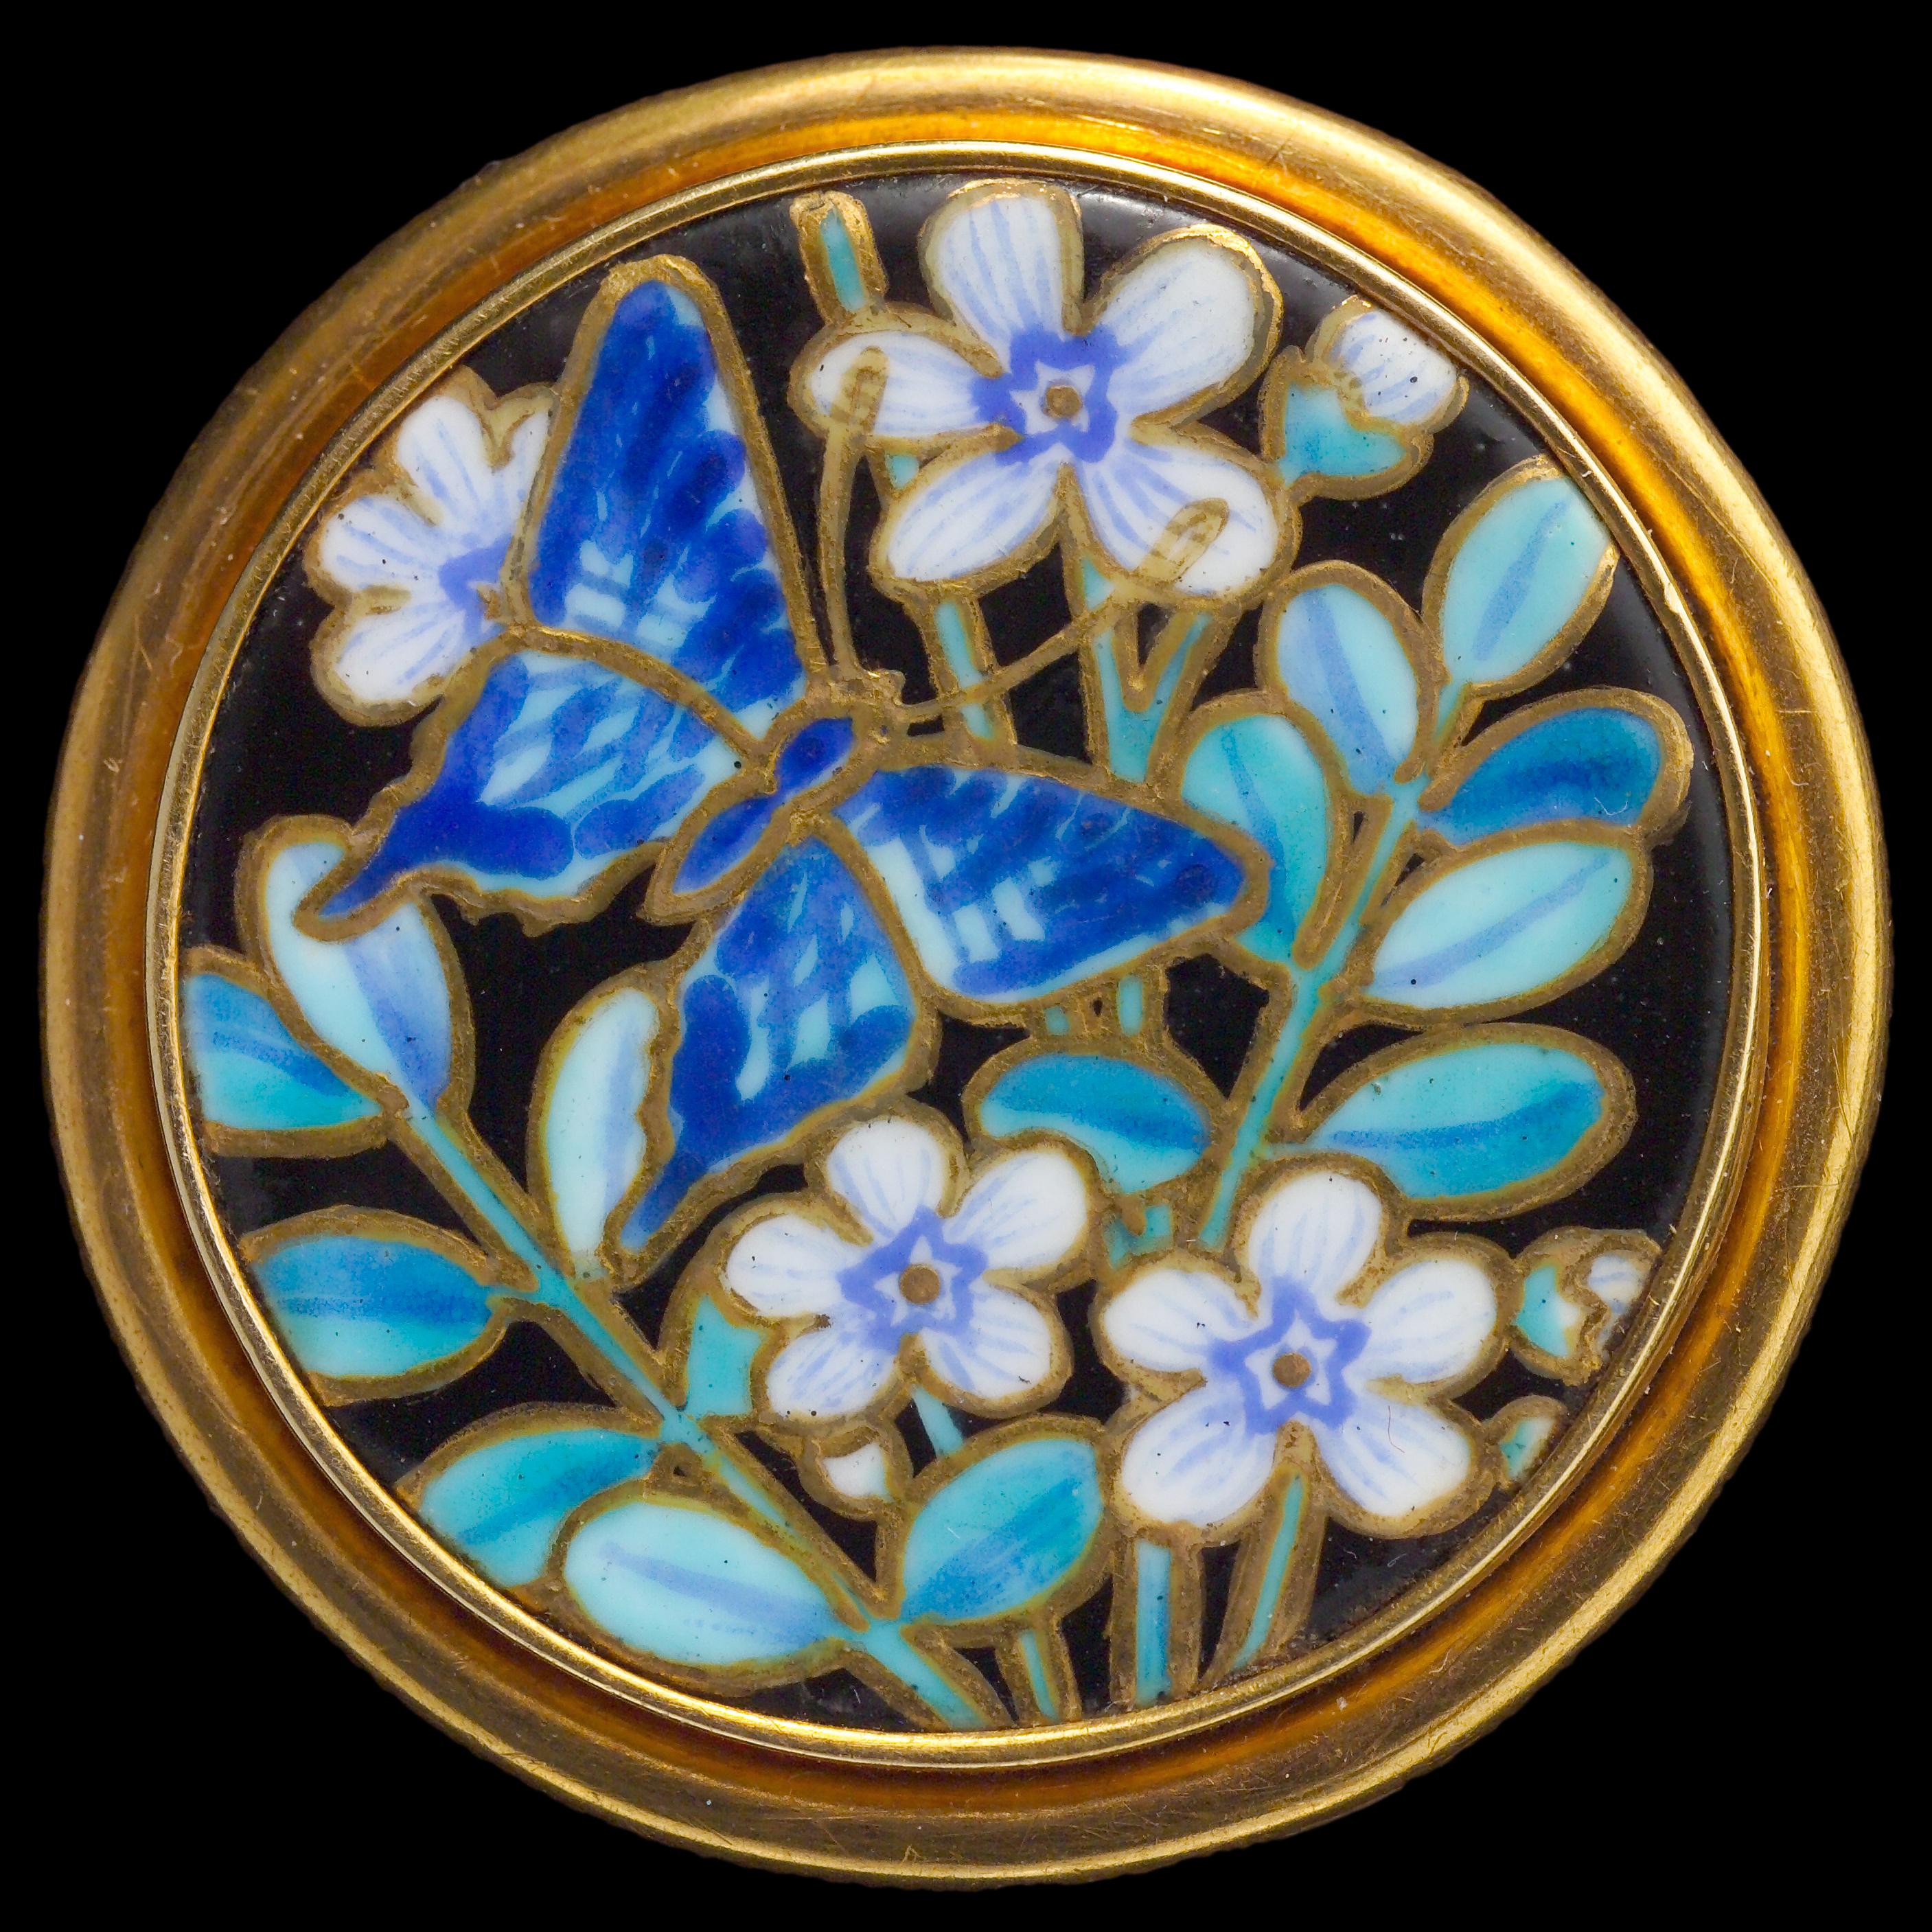 A lovely example of Japonisme in gold & enamel on porcelain probably from Limoges.

Additional Information:
Material: Gold, porcelain
Origin: French, c. 1880
Marks: Monogram verso
Case: Fitted Case
Dimensions: Diameter  3.80cm (1.50 in)